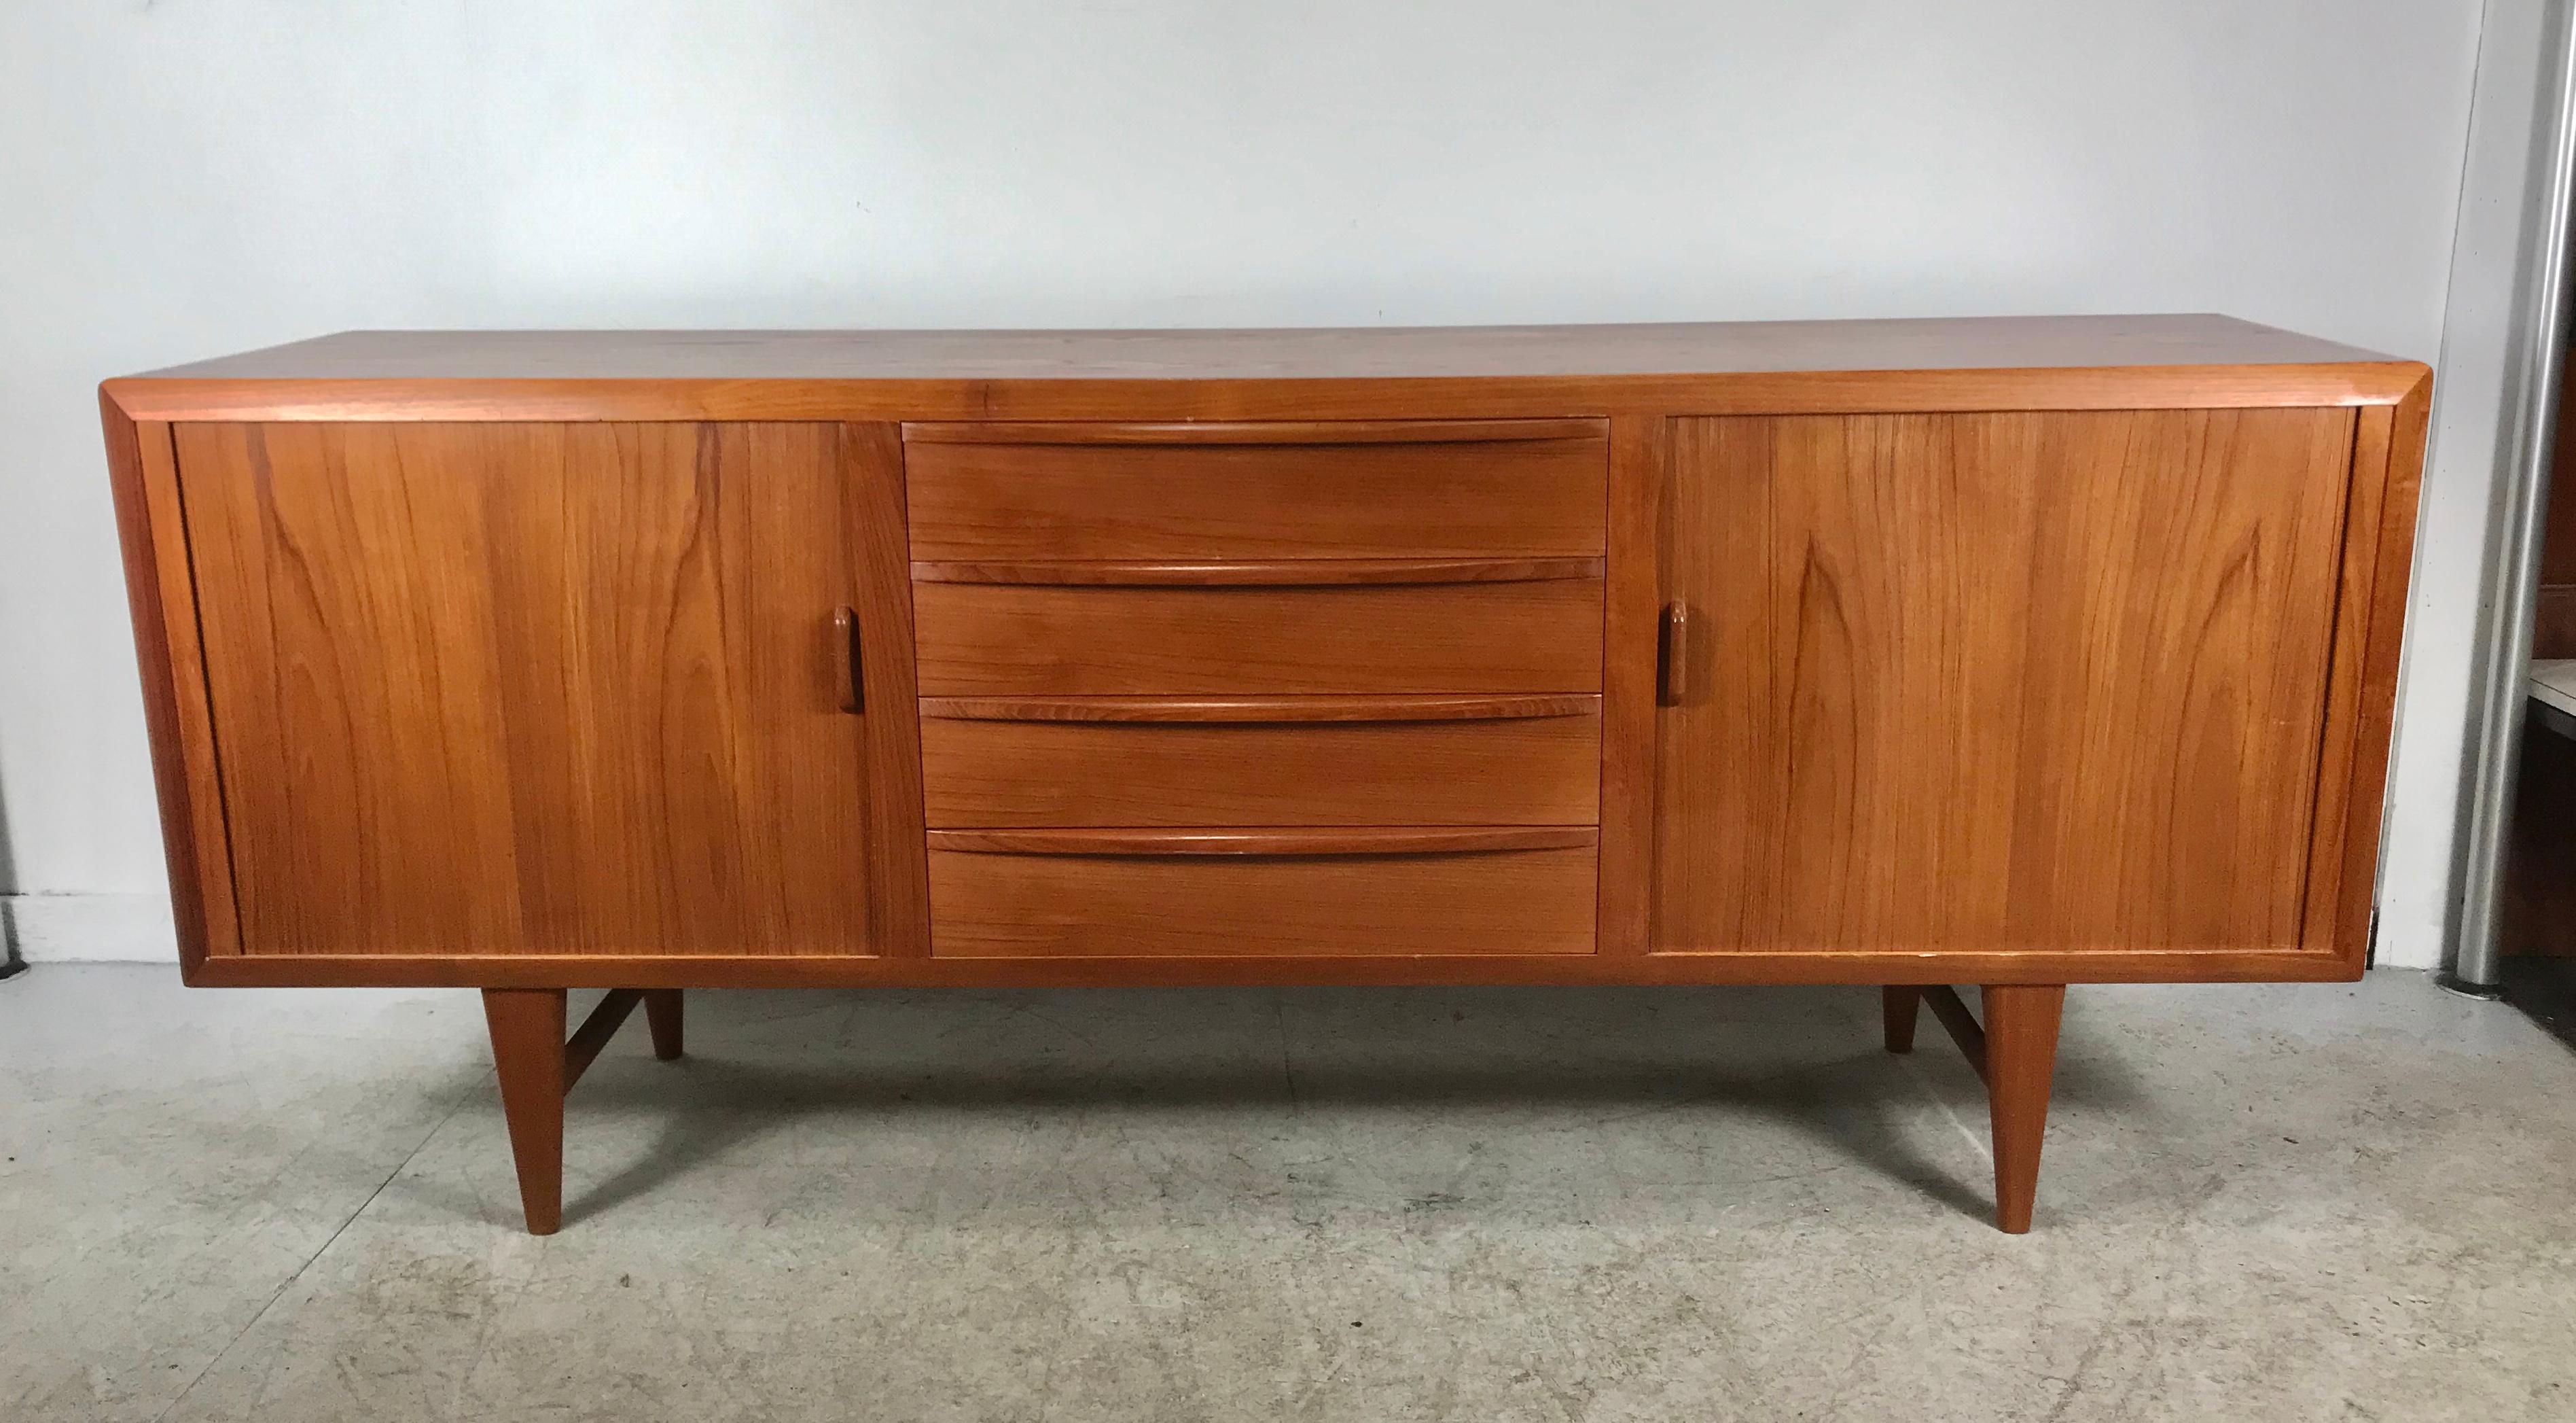 Magnificent and rare Danish design sideboard designed by: Ib Kofod-Larsen for the Faarup Møbelfabrik in the 1950s. An exceptional beautiful sideboard with organic lines and warm teak wood. The sideboard has four drawers and two tambour doors who